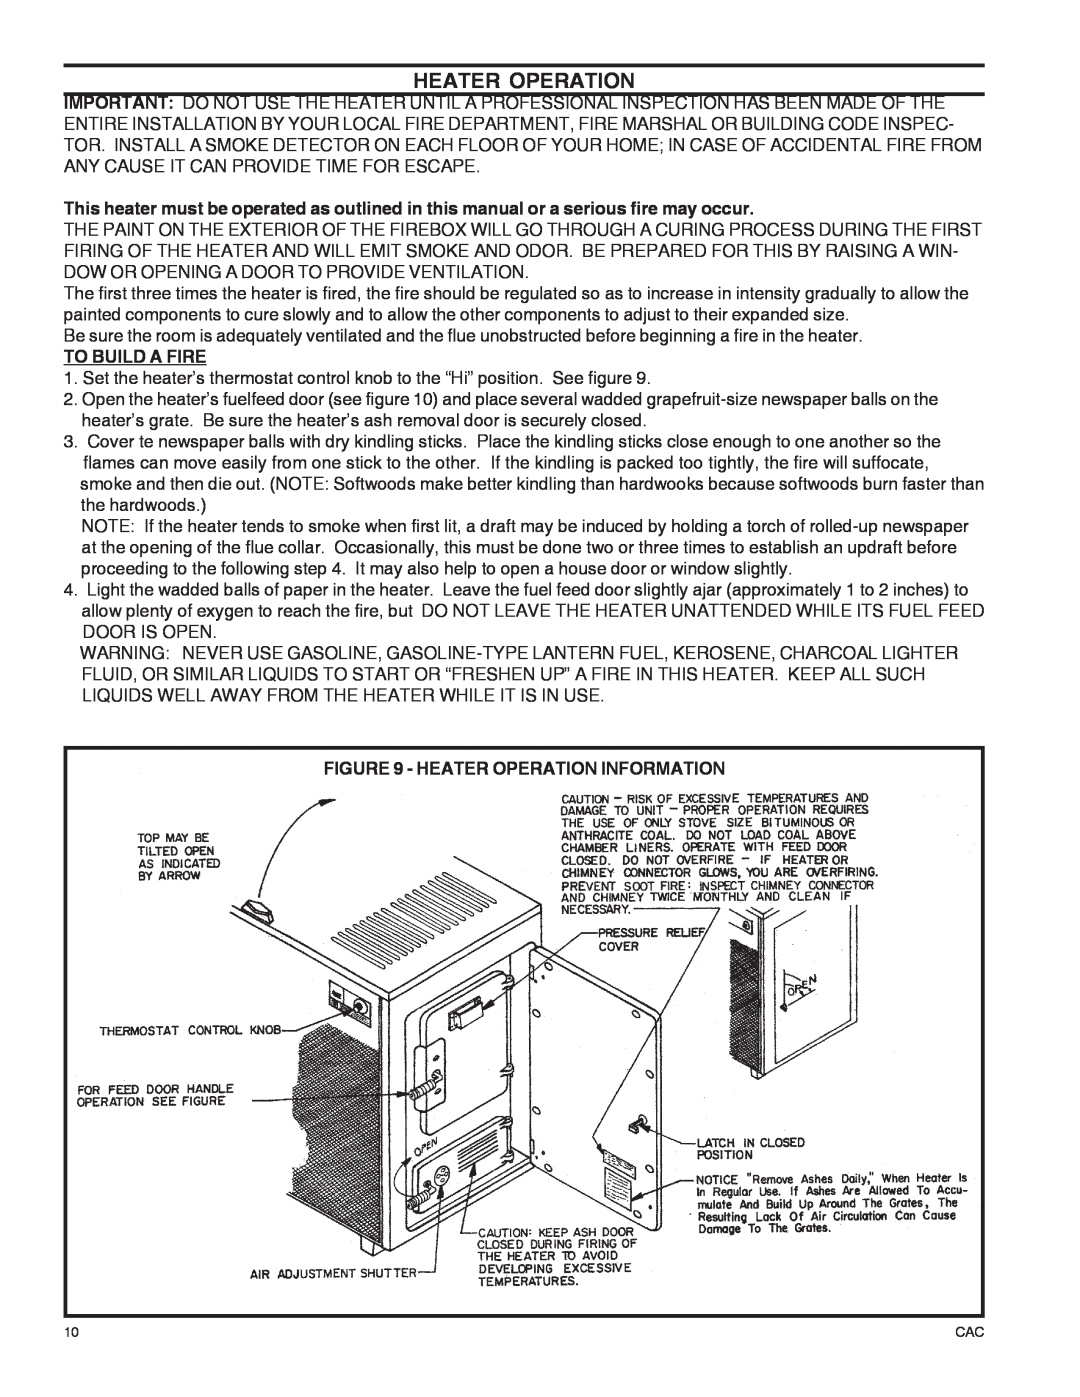 United States Stove DR6 warranty To Build A Fire, Heater Operation Information 